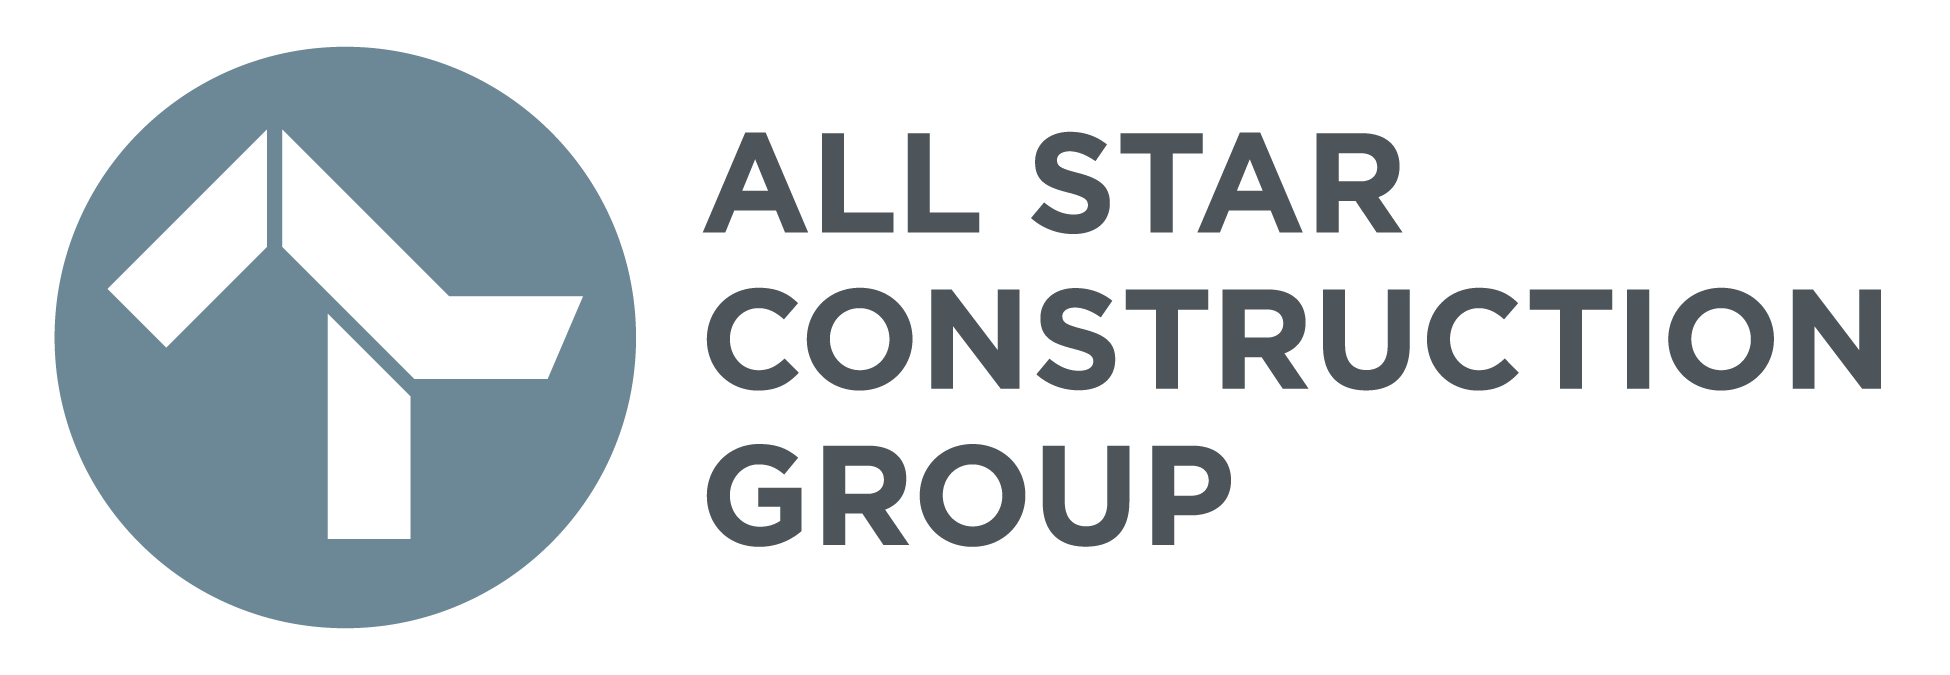 All Star Construction Group